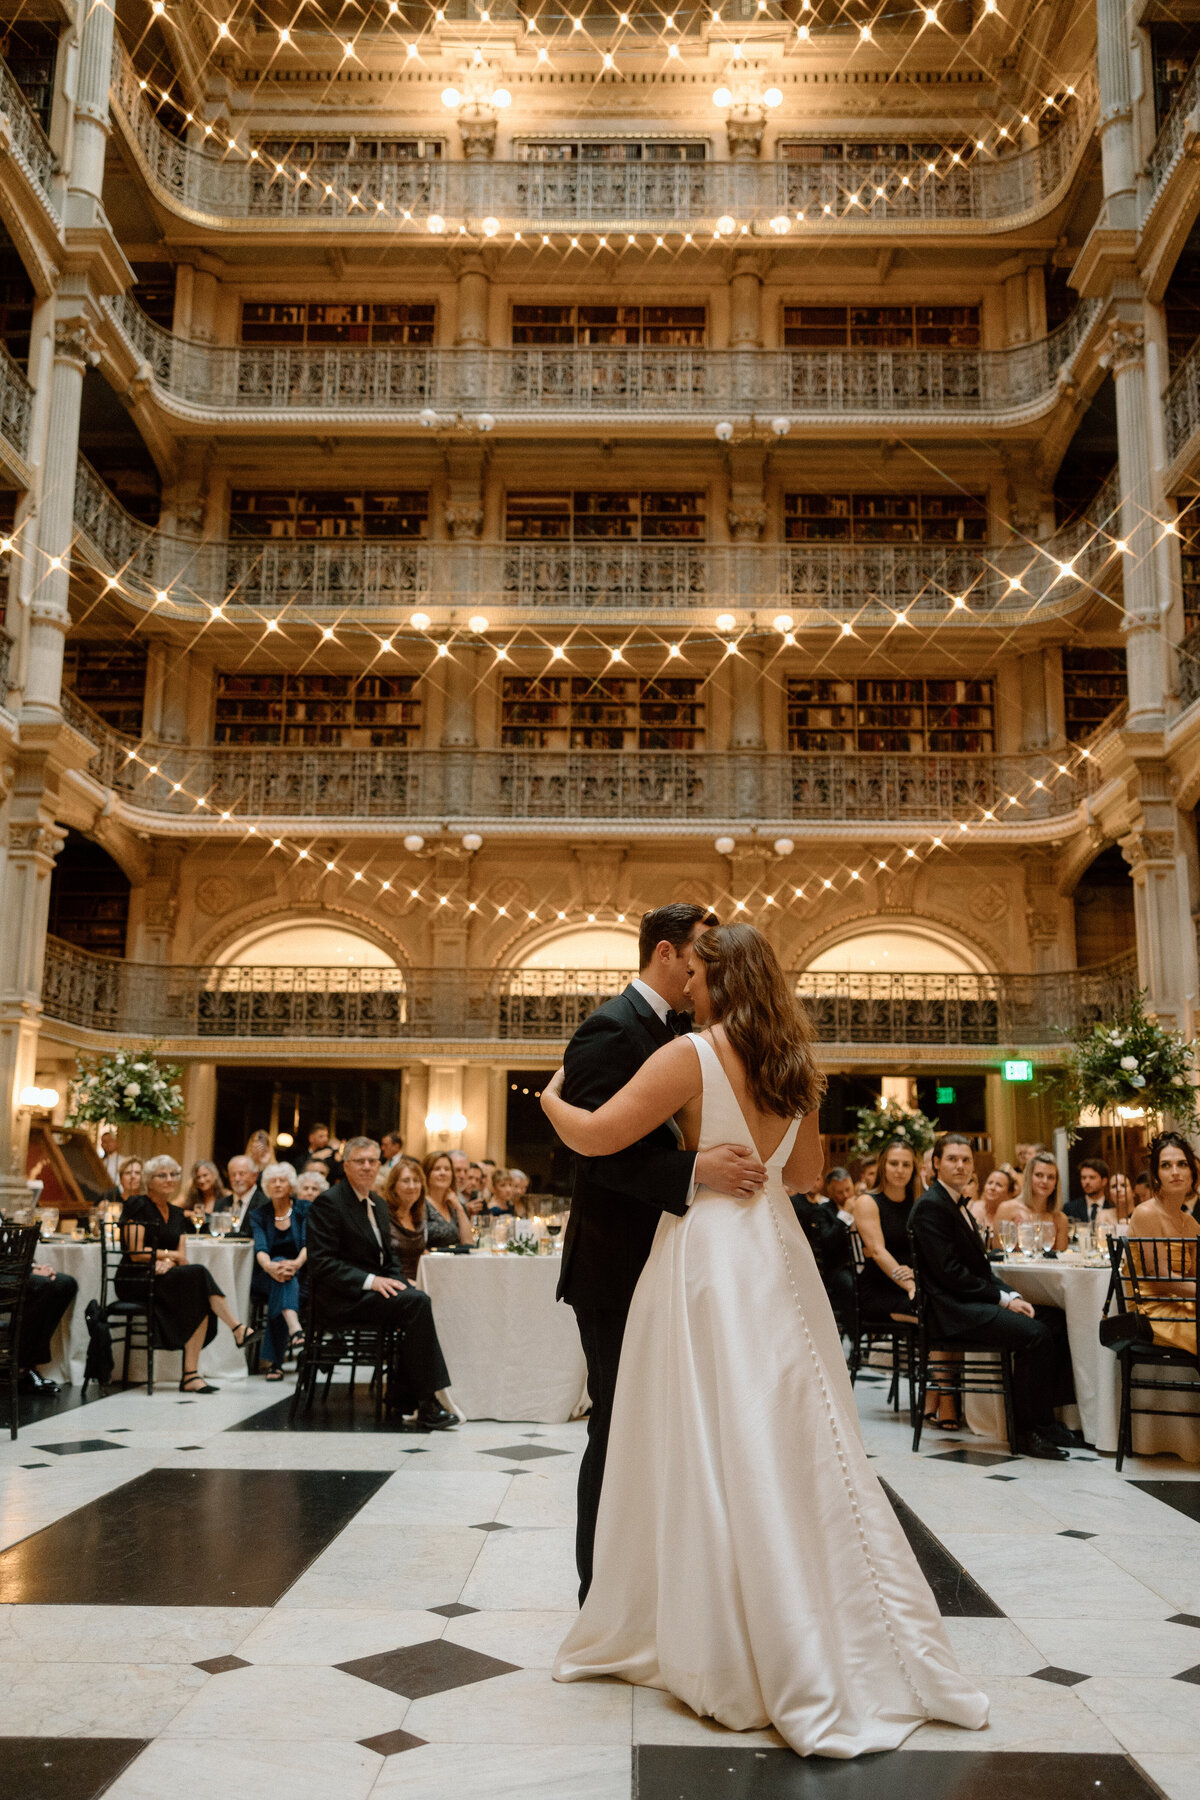 Event-Planning-DC-Wedding-Baltimore-George-Peabody-Library-First-Dance-Anna-Lowe-Photography-